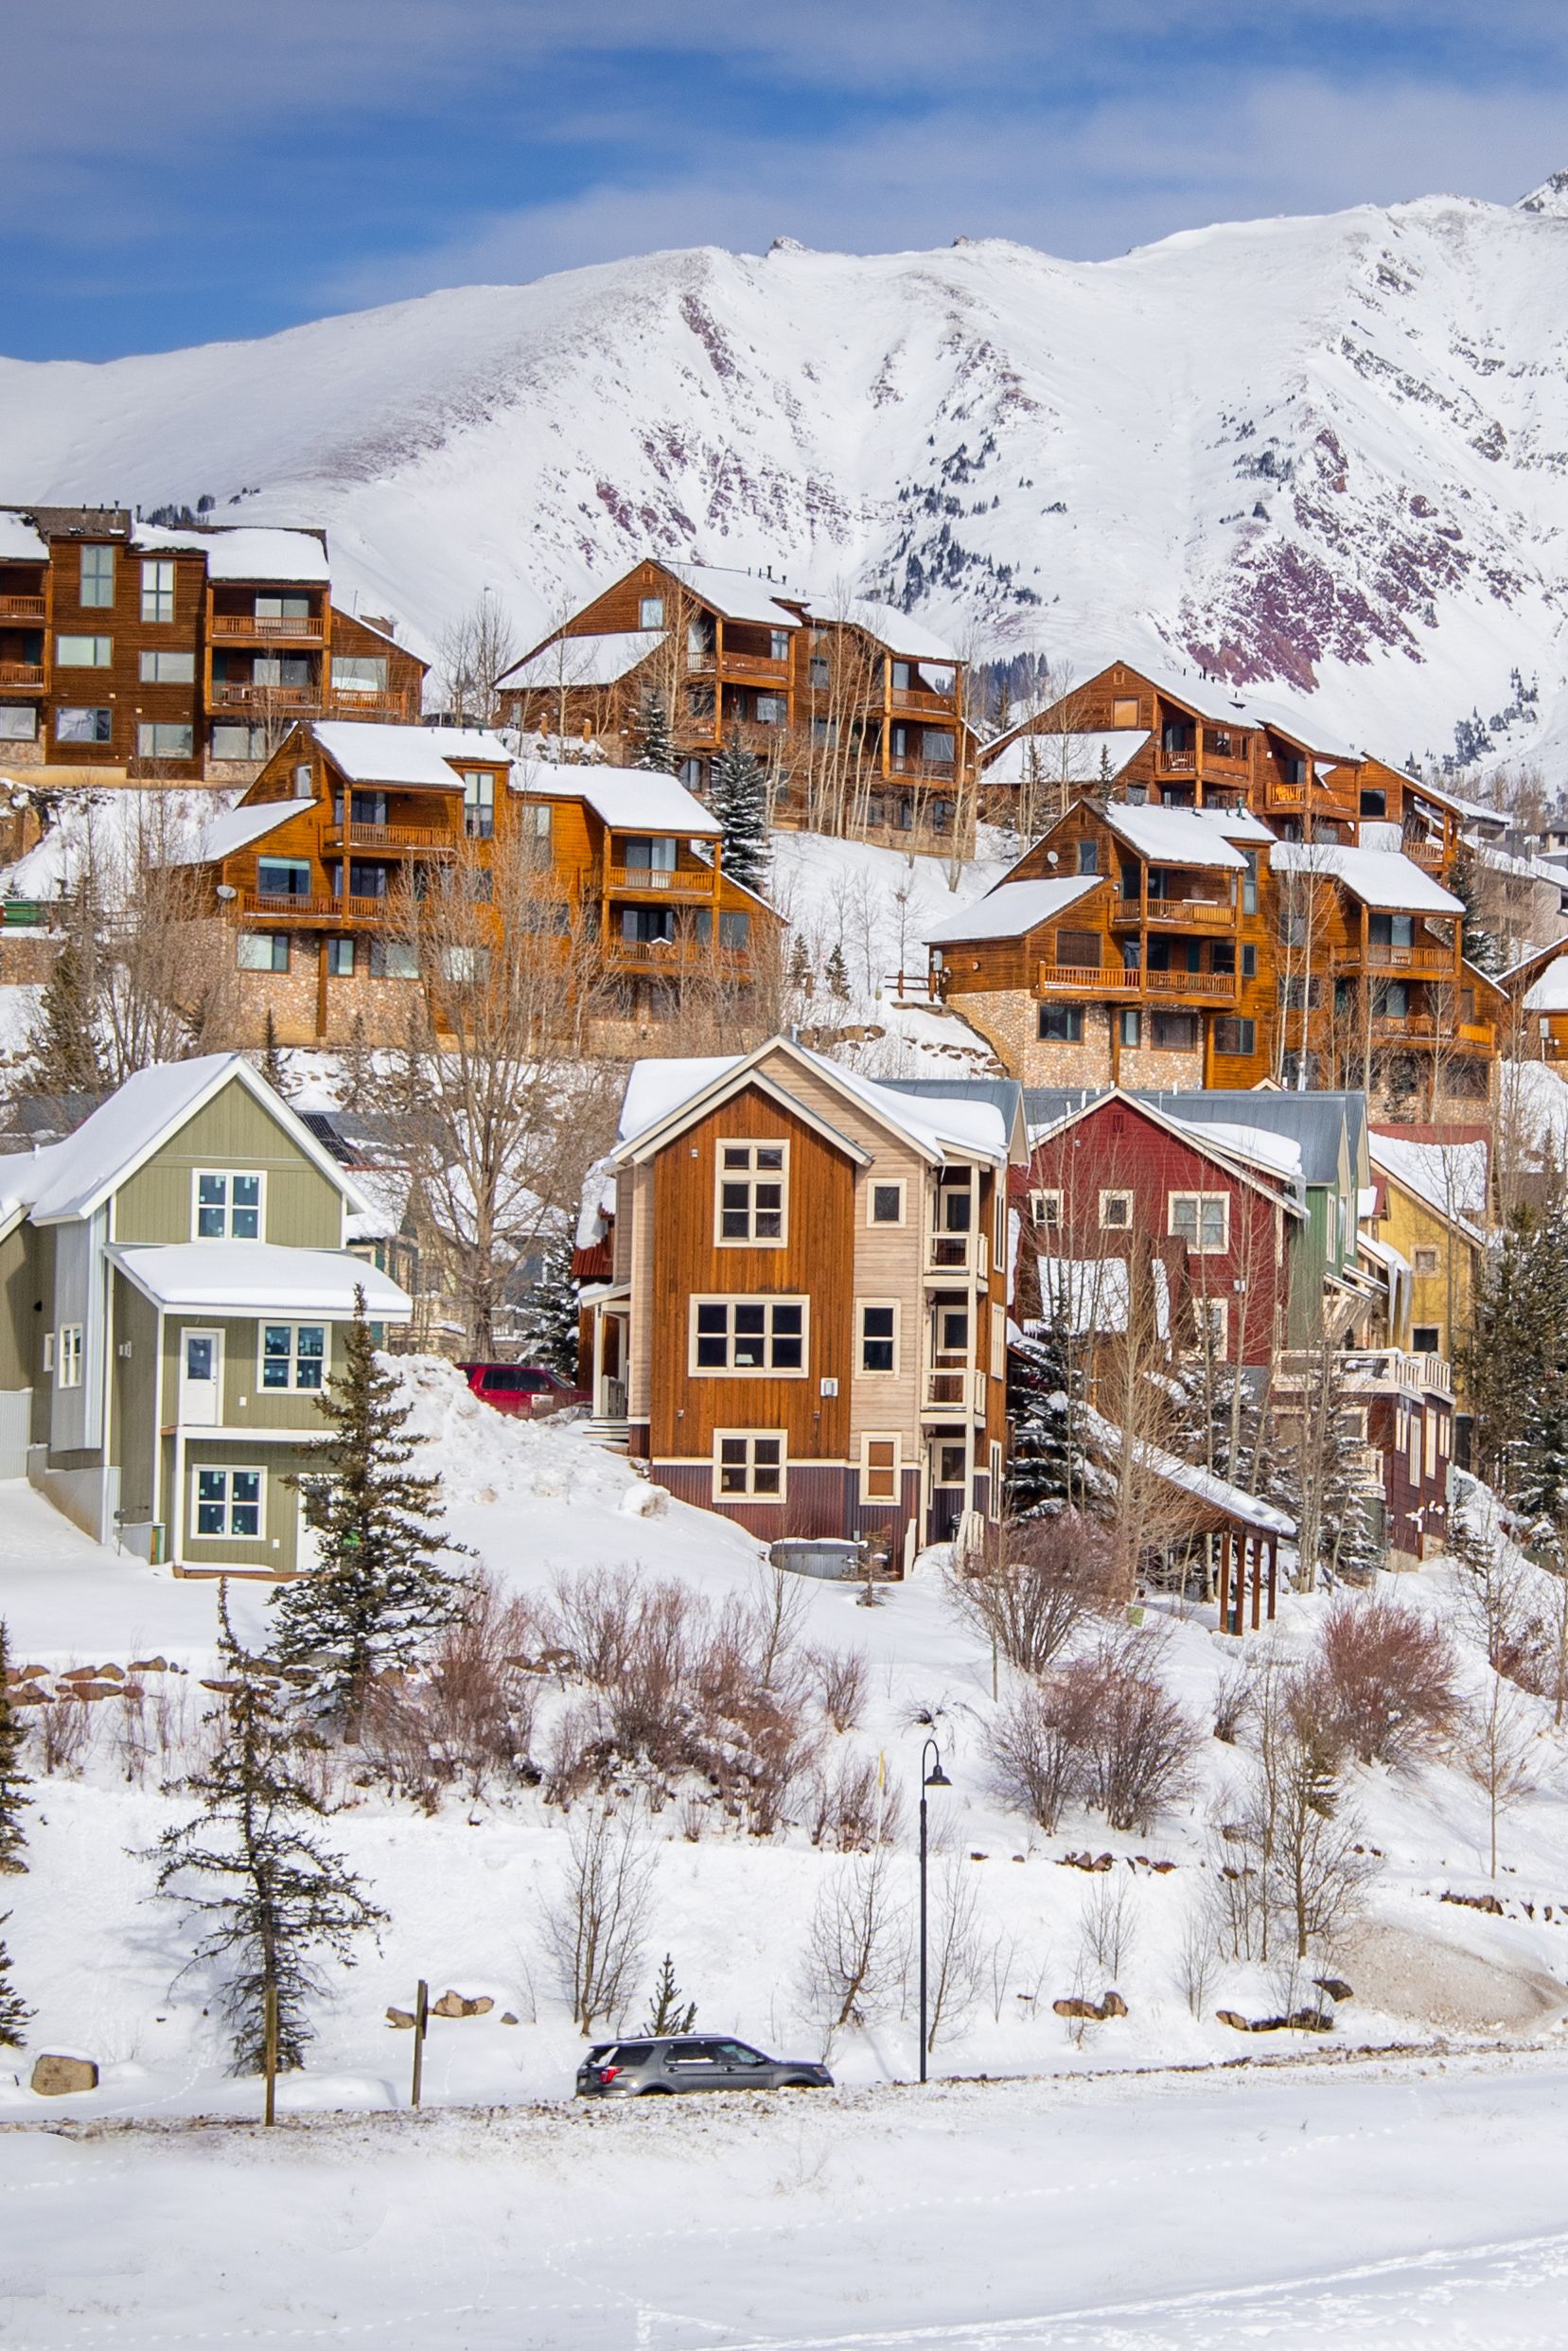 Snow-covered hotels sit upon a steep hill with large mountains in the background, in the town of Mt. Crested Butte, Colorado.